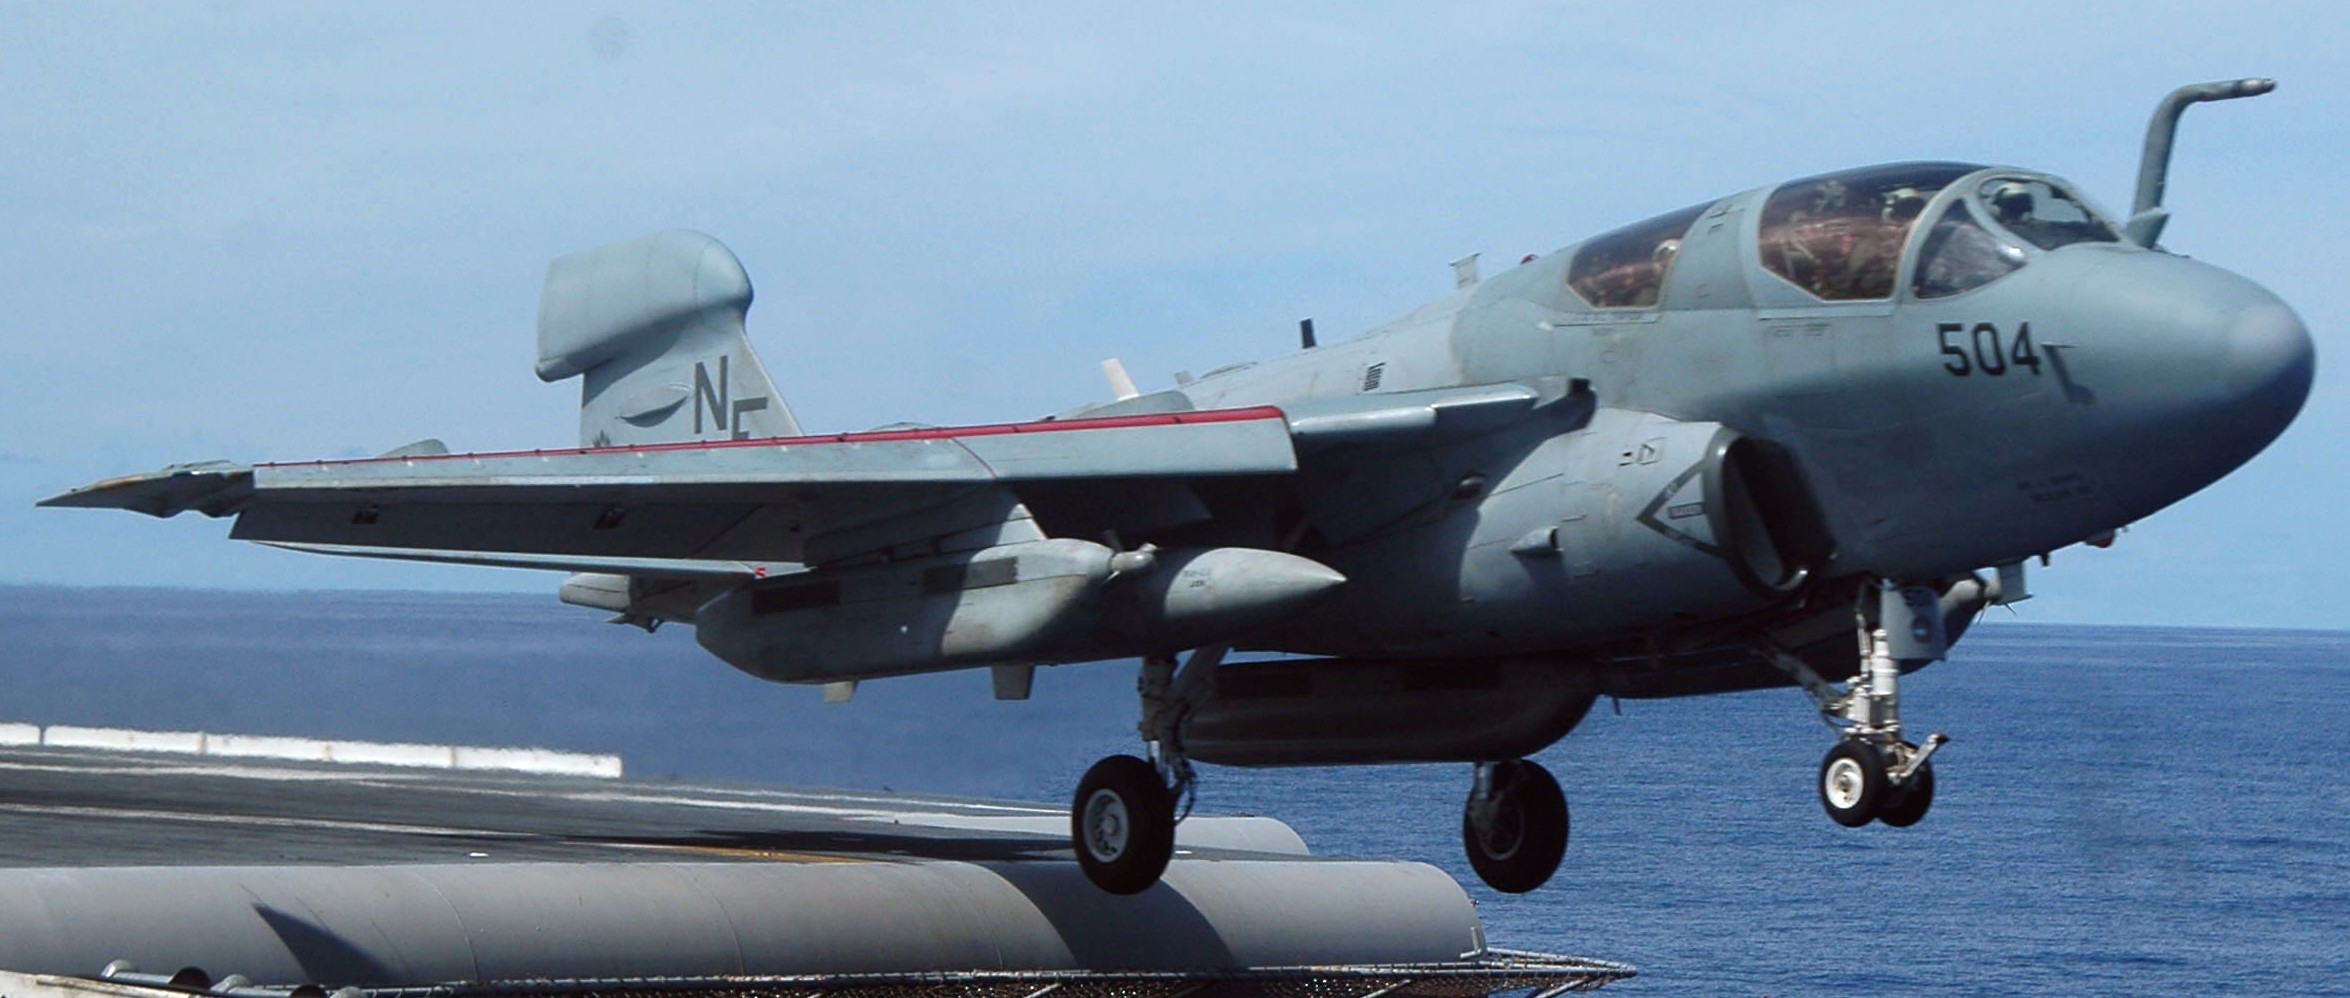 vaq-136 gauntlets electronic attack squadron vaqron us navy ea-6b prowler carrier air wing cvw-5 uss kitty hawk cv-63 59